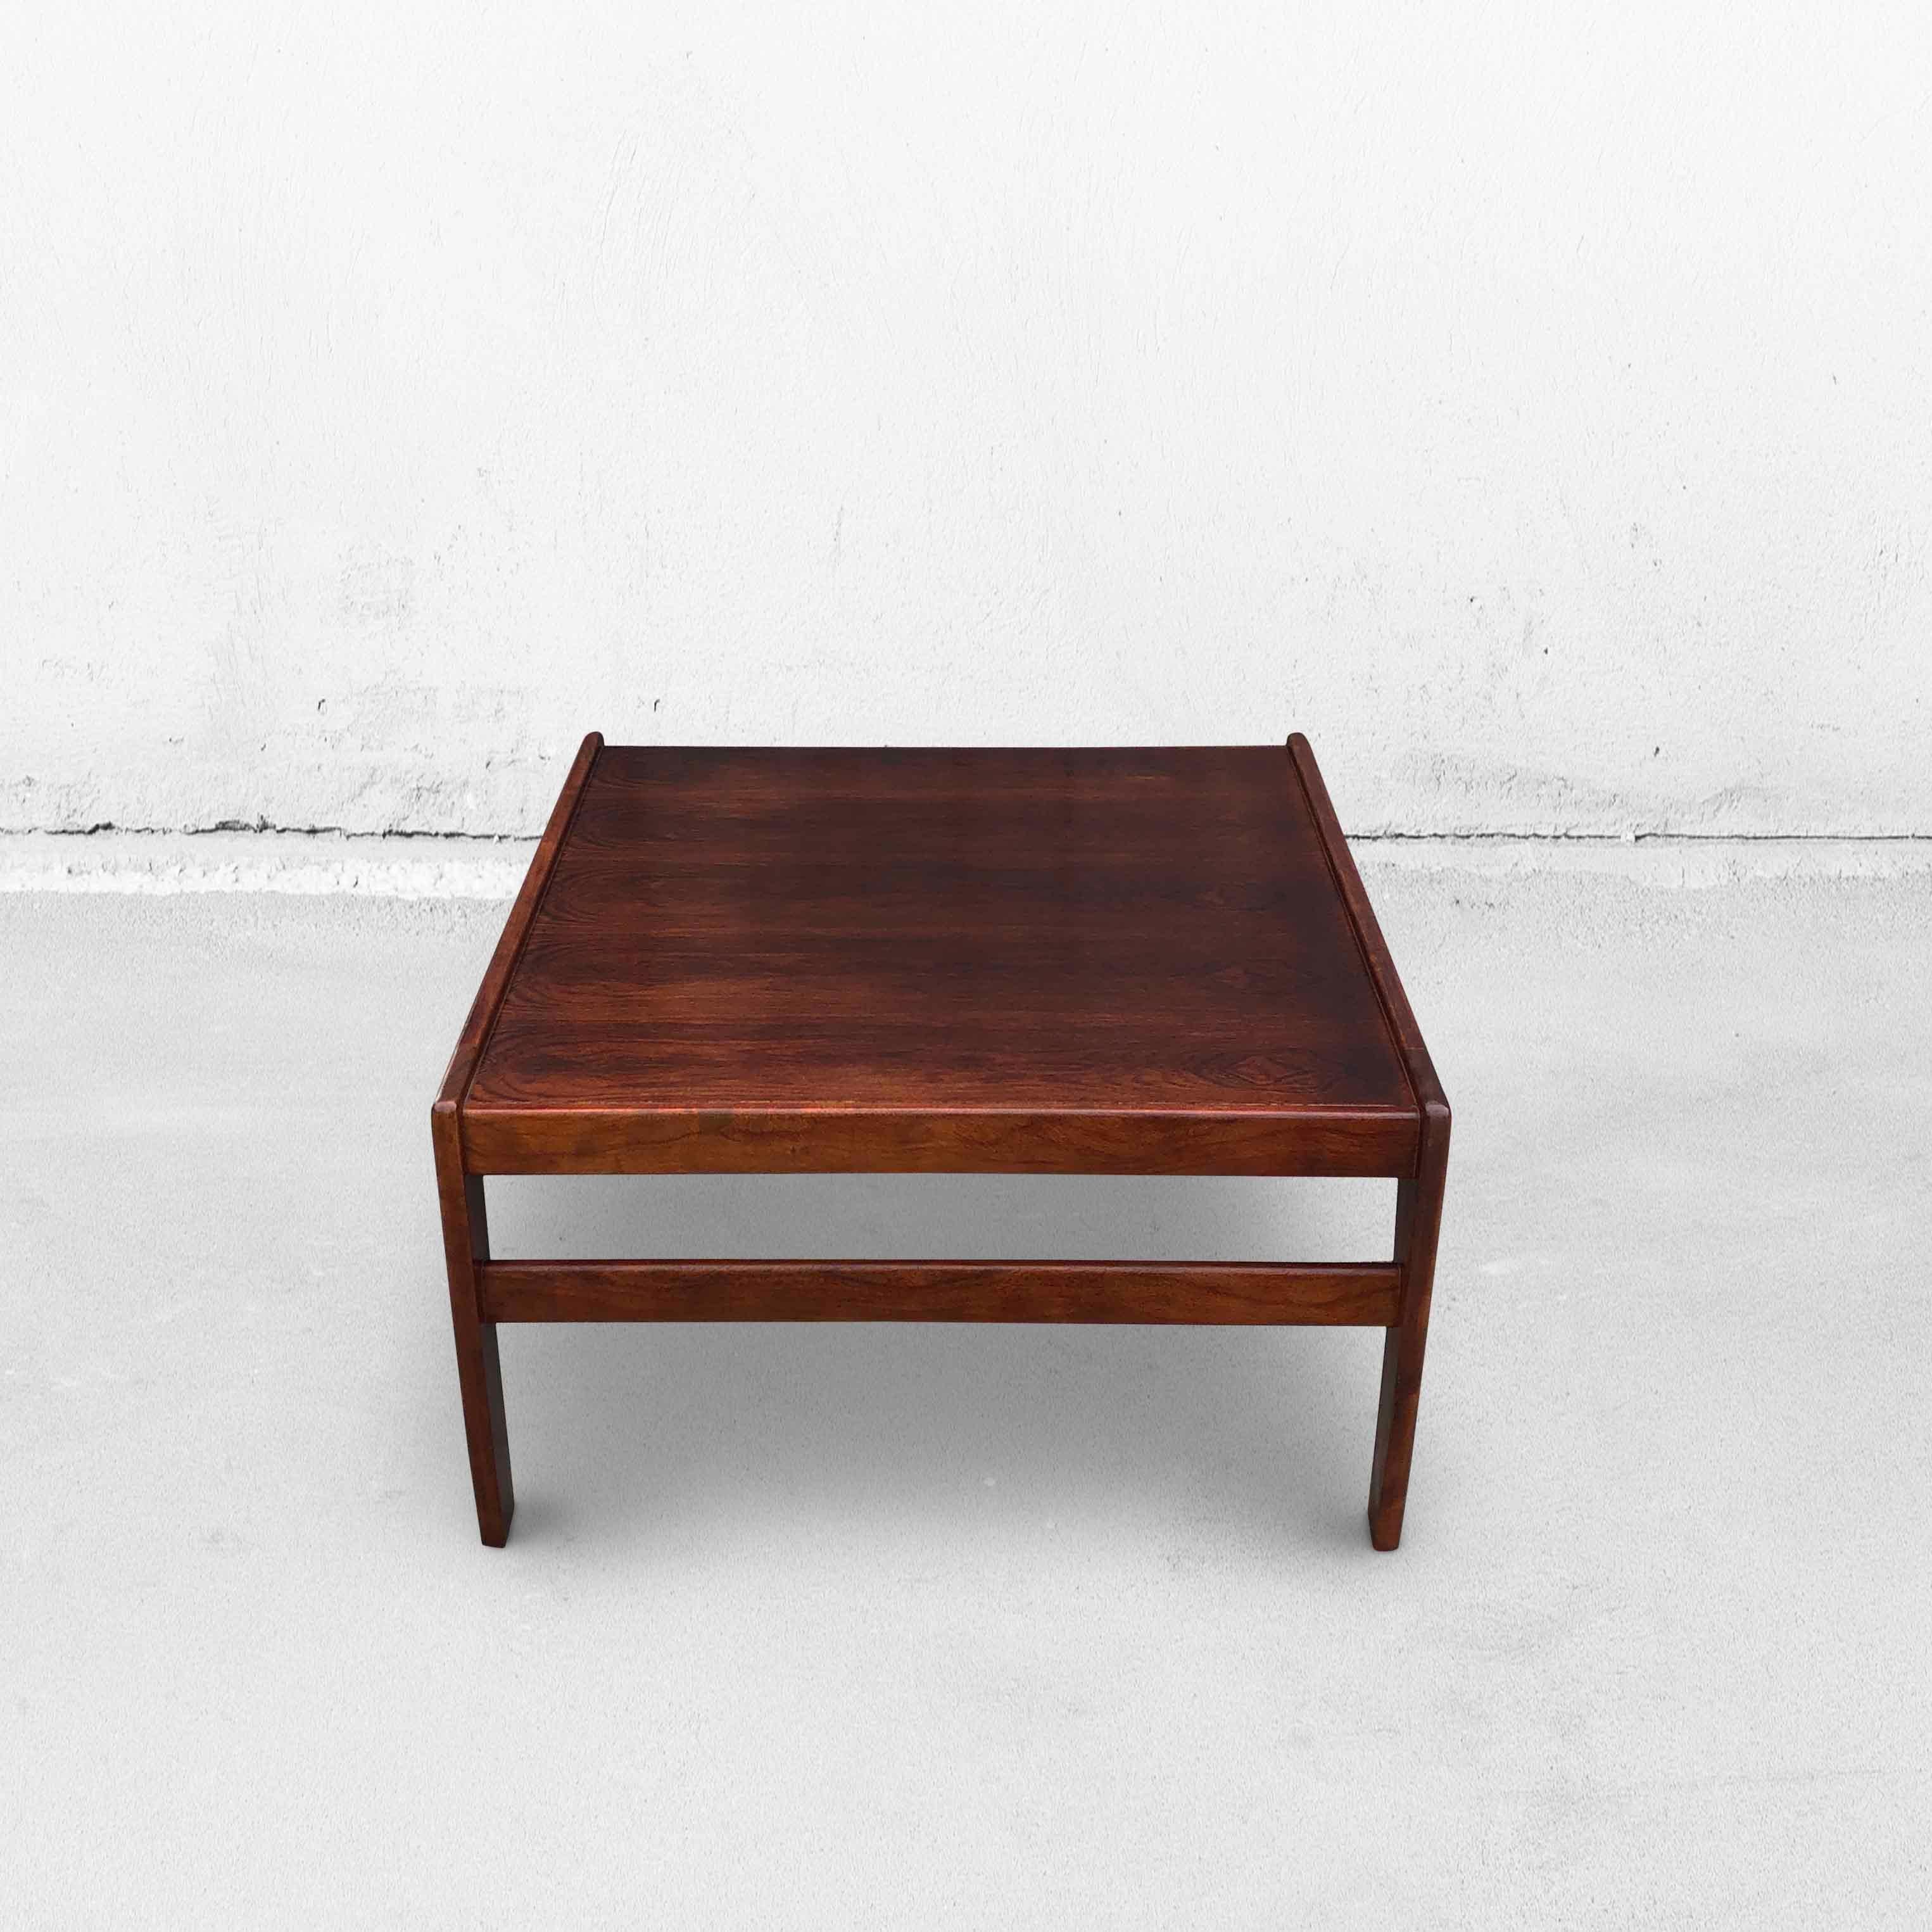 This low mid-century coffee table fits into any interior. The table is made of rosewood and has slightly curved legs. The rim is raised on two sides. This beautifully finished table has an elegant appearance. The table has a small gap along 1 side